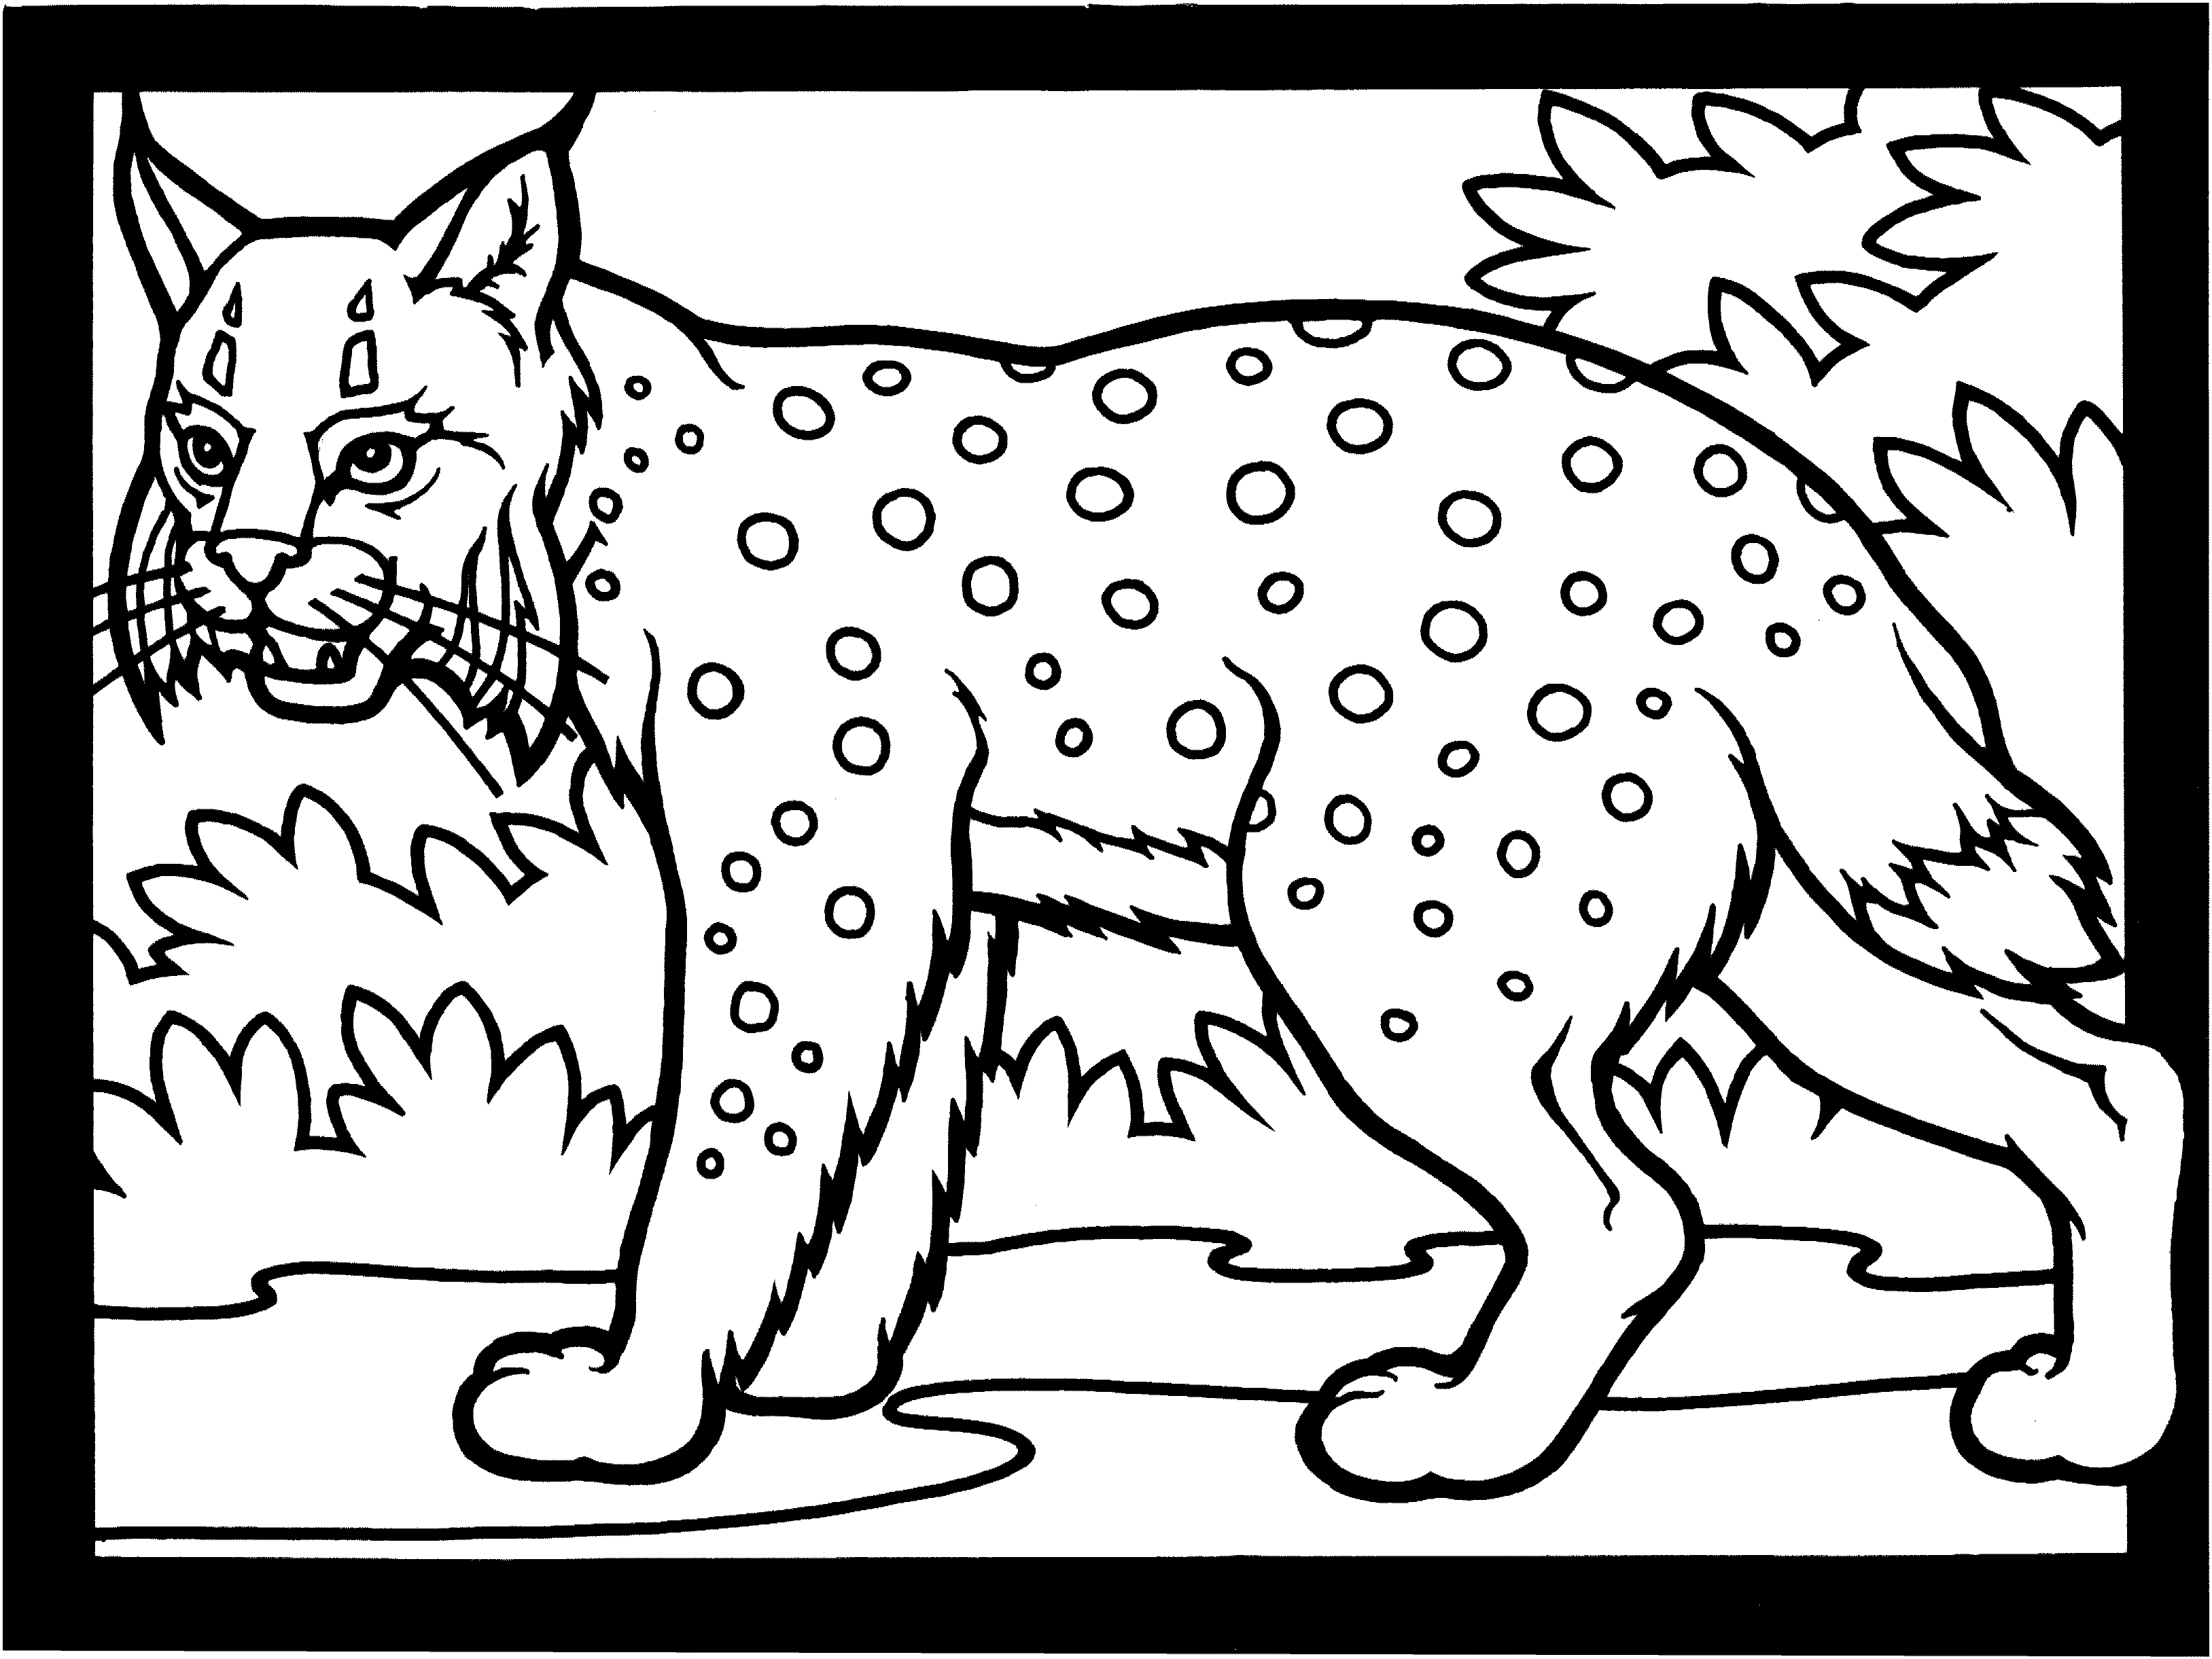 Lynx coloring #8, Download drawings